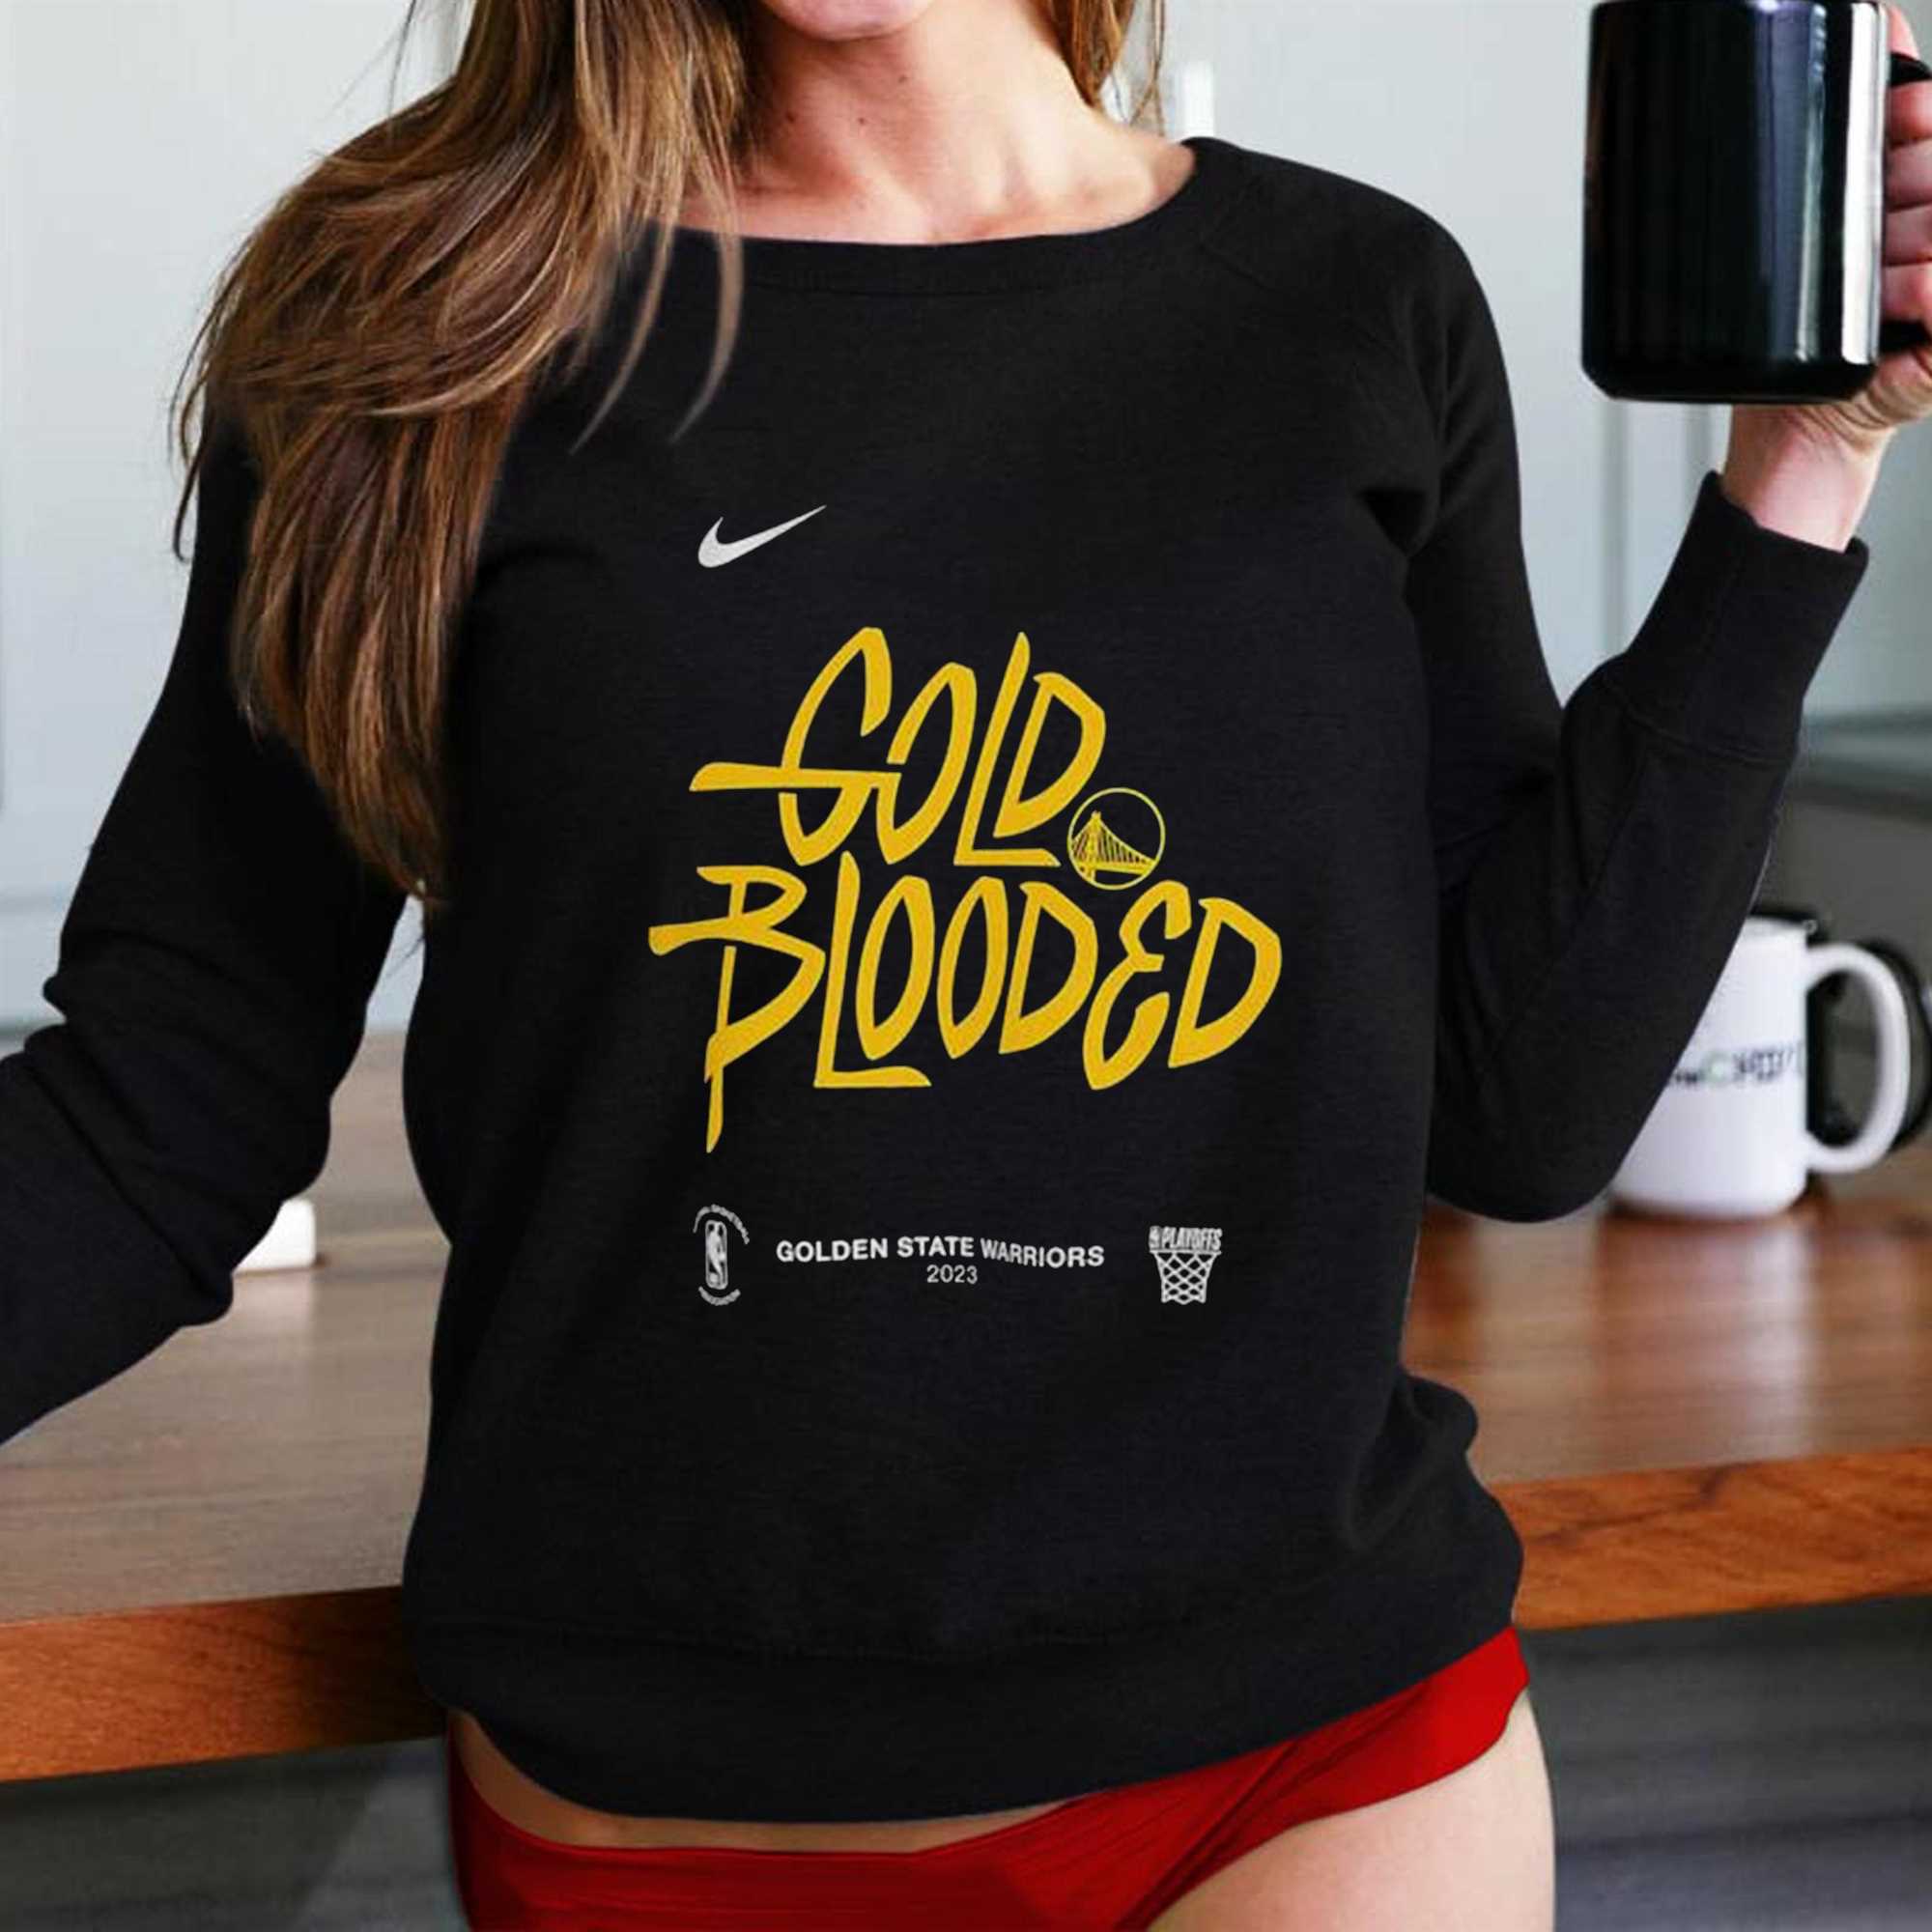 nba store gold blooded